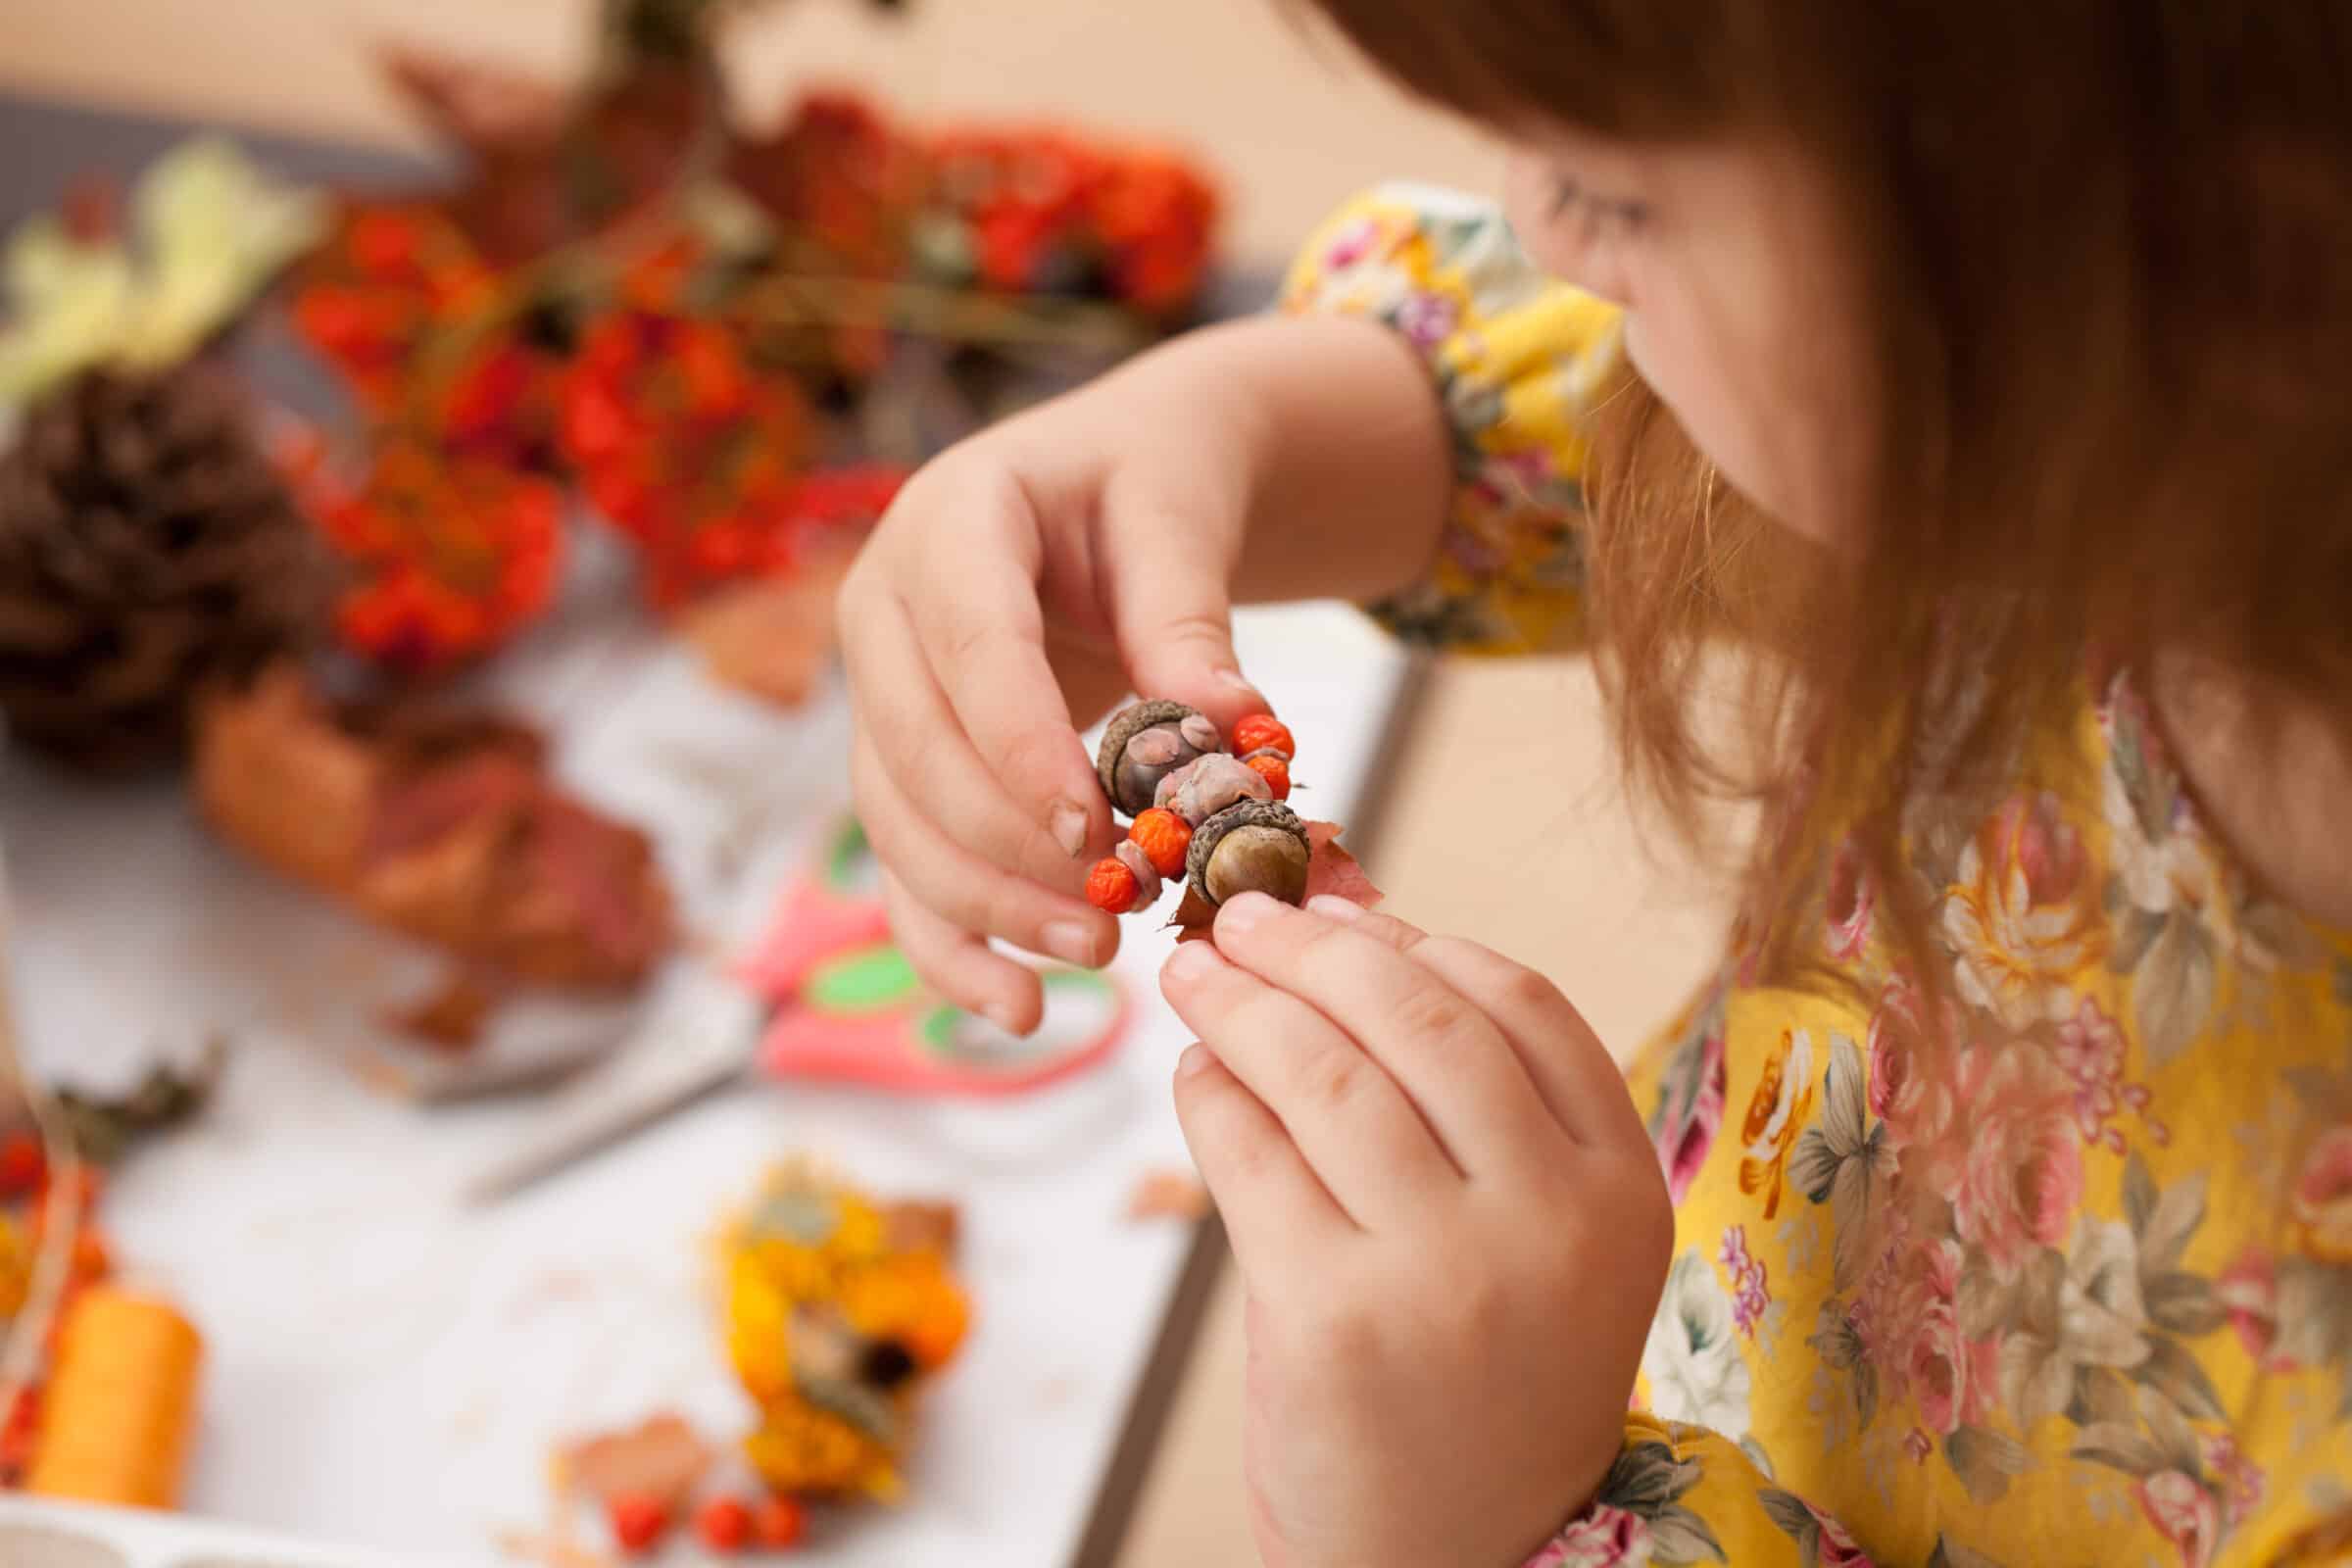 Child holding craft made of acorns over table of other craft materials.